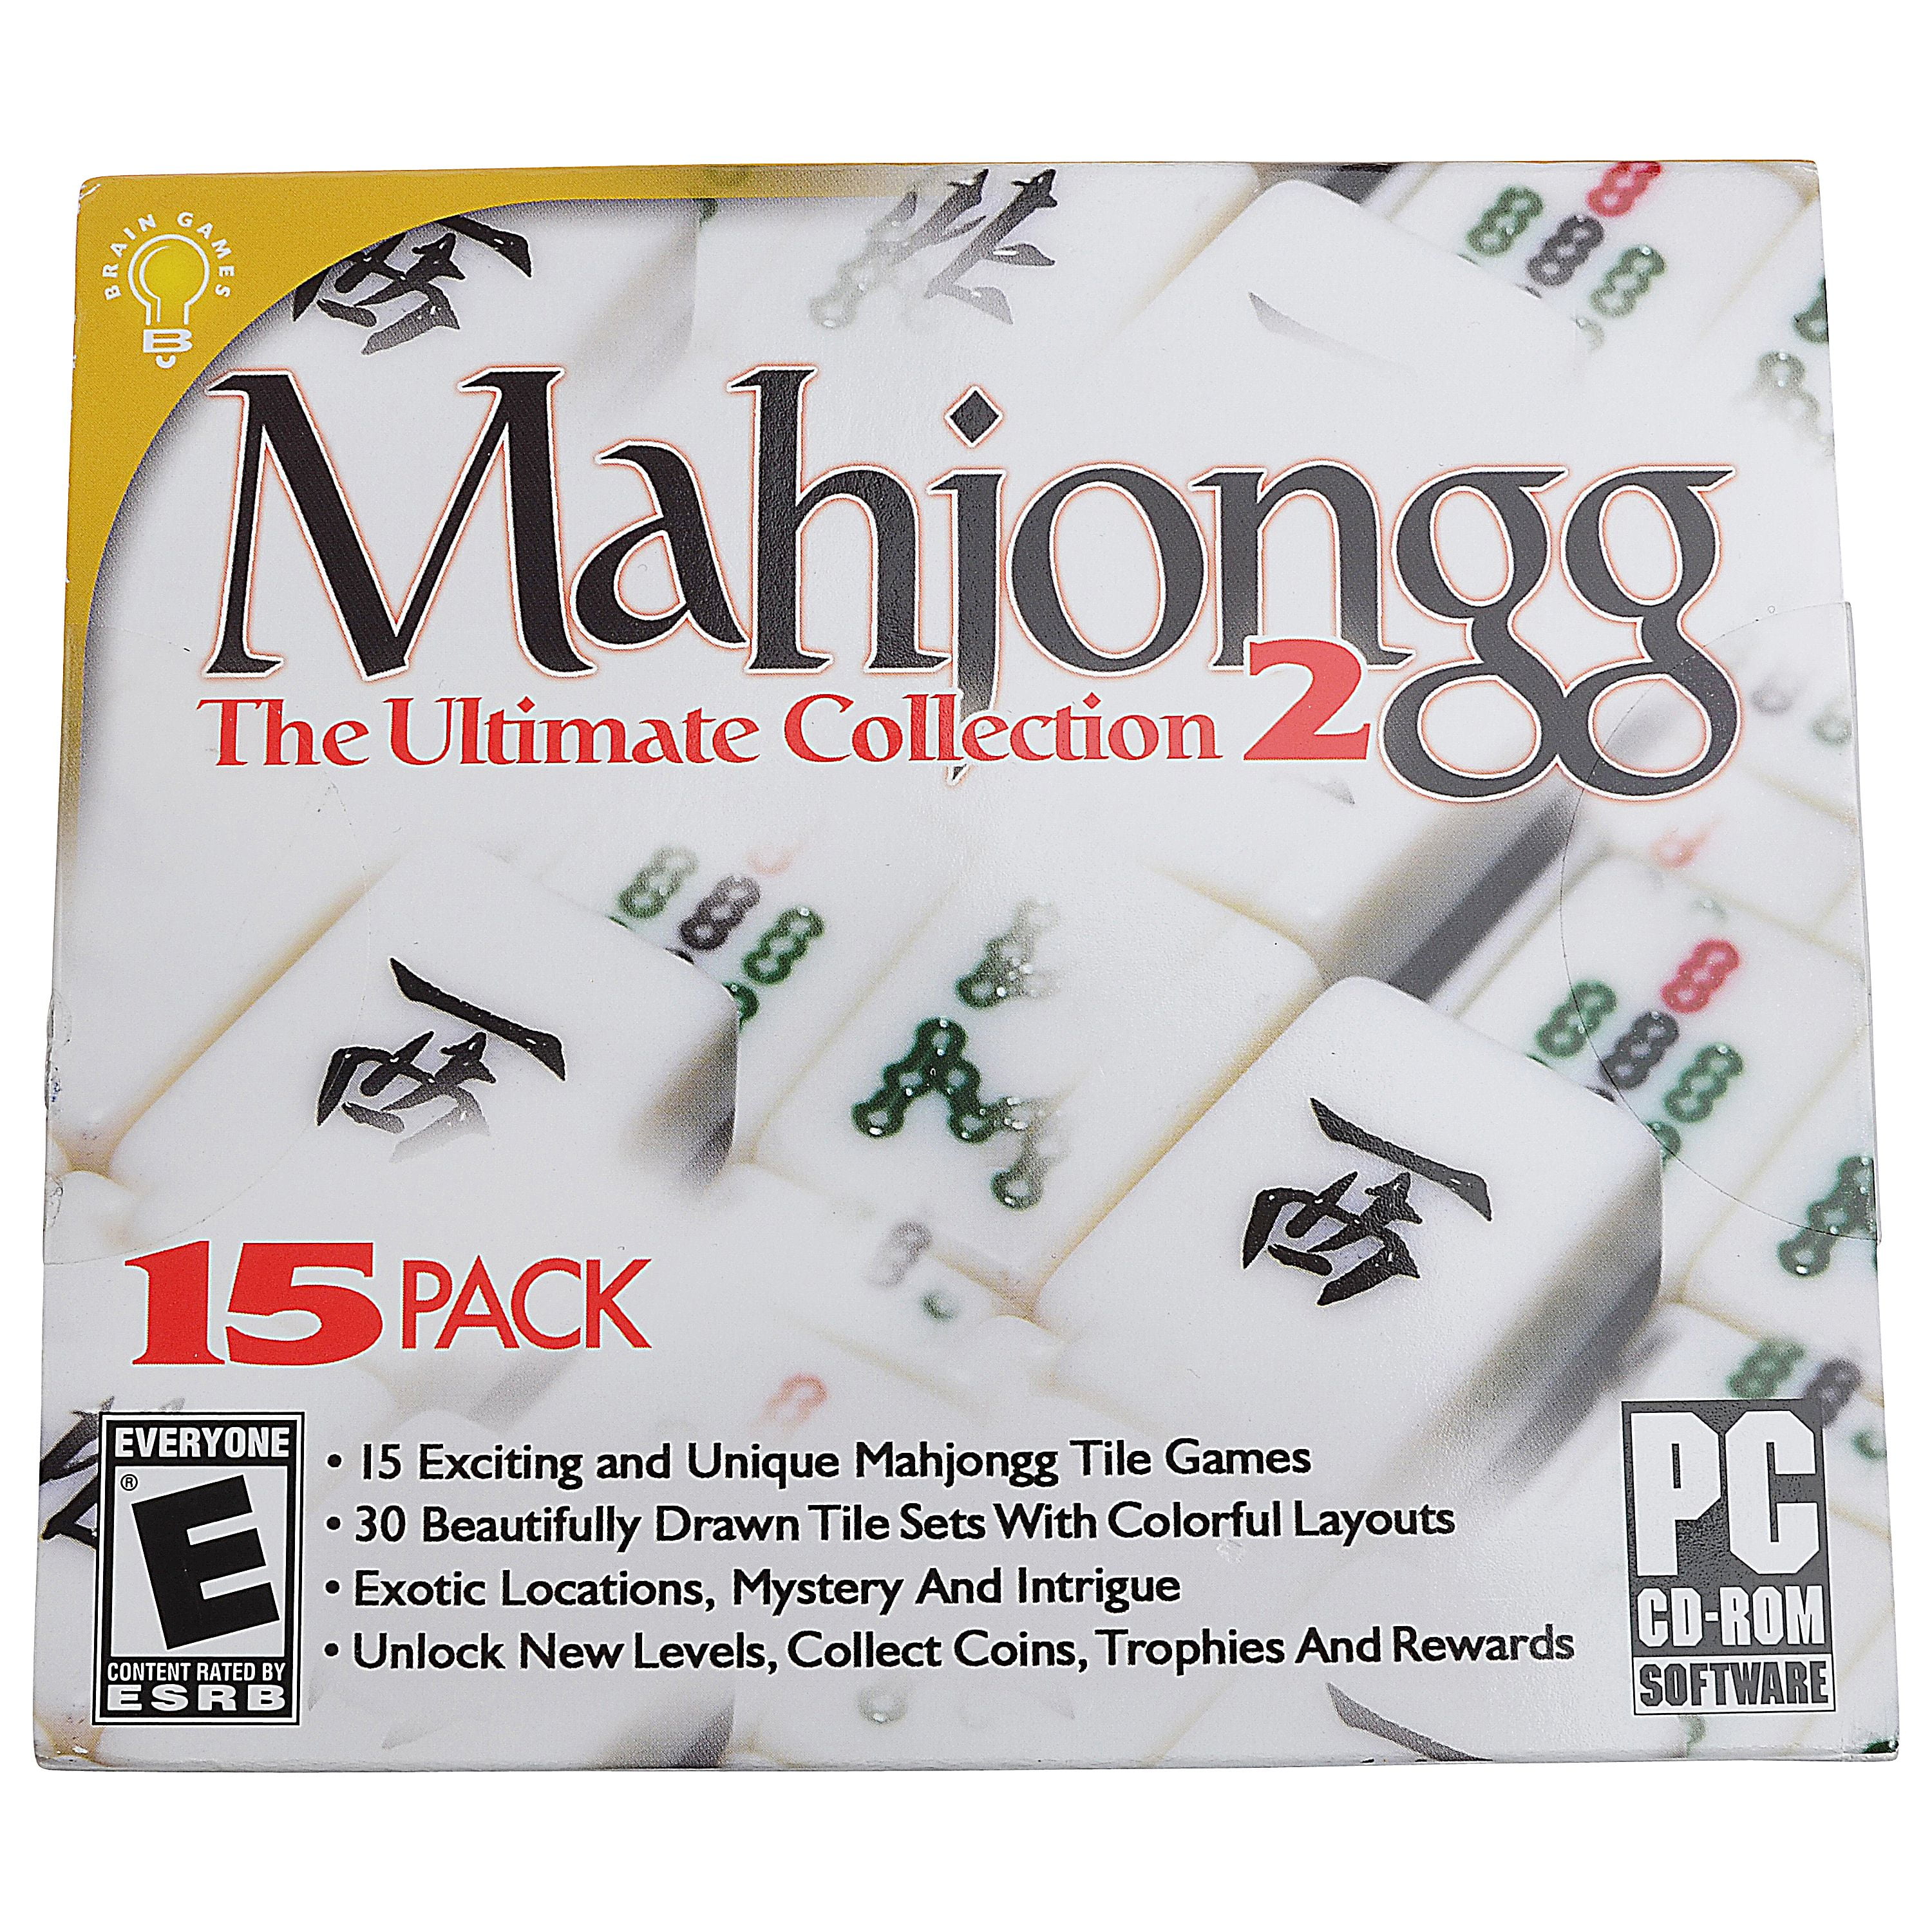 Mahjongg The Ultimate Collection (PC CD-ROM), 15 pack - Walmart.com